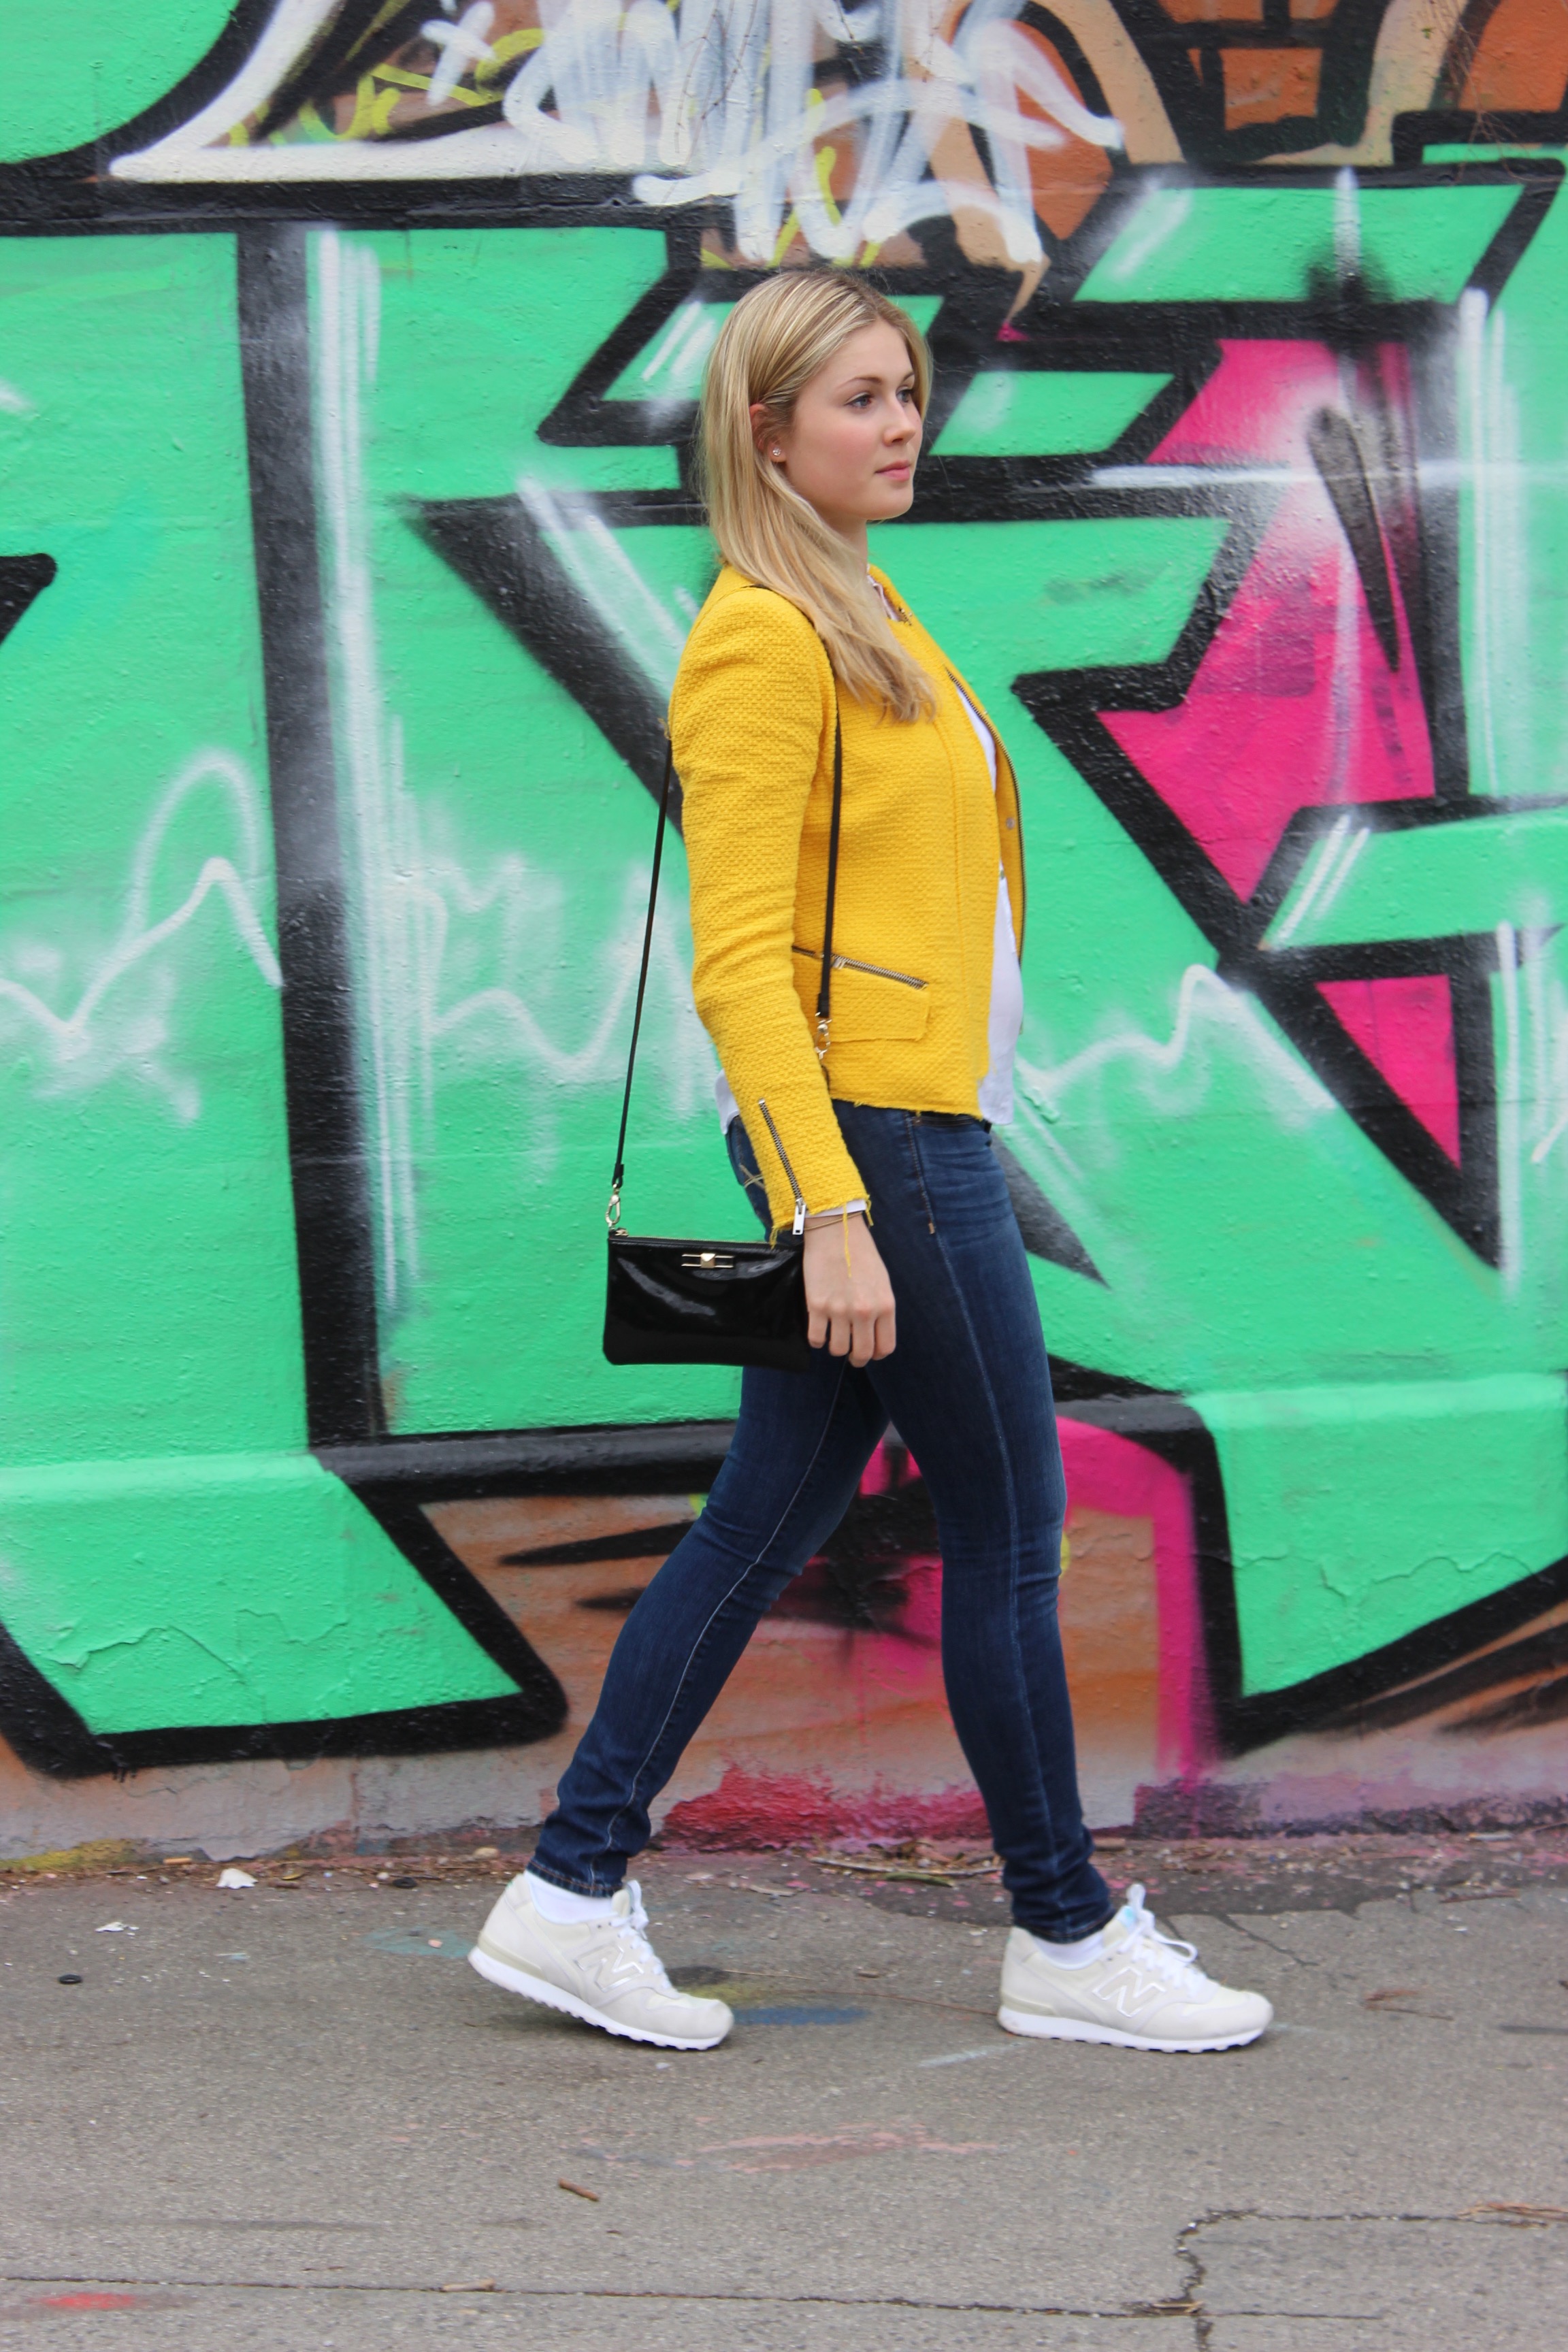 Bits and Bobs by Eva, Blog, Austrian Blog, Österreichische Blog, lovedailydose, your daily treat, fashion, beauty, food, interior, fitness, new, bitsandbobsbyeva.com, travel, outfit, ootd, spring color yellow, gelber Blazer